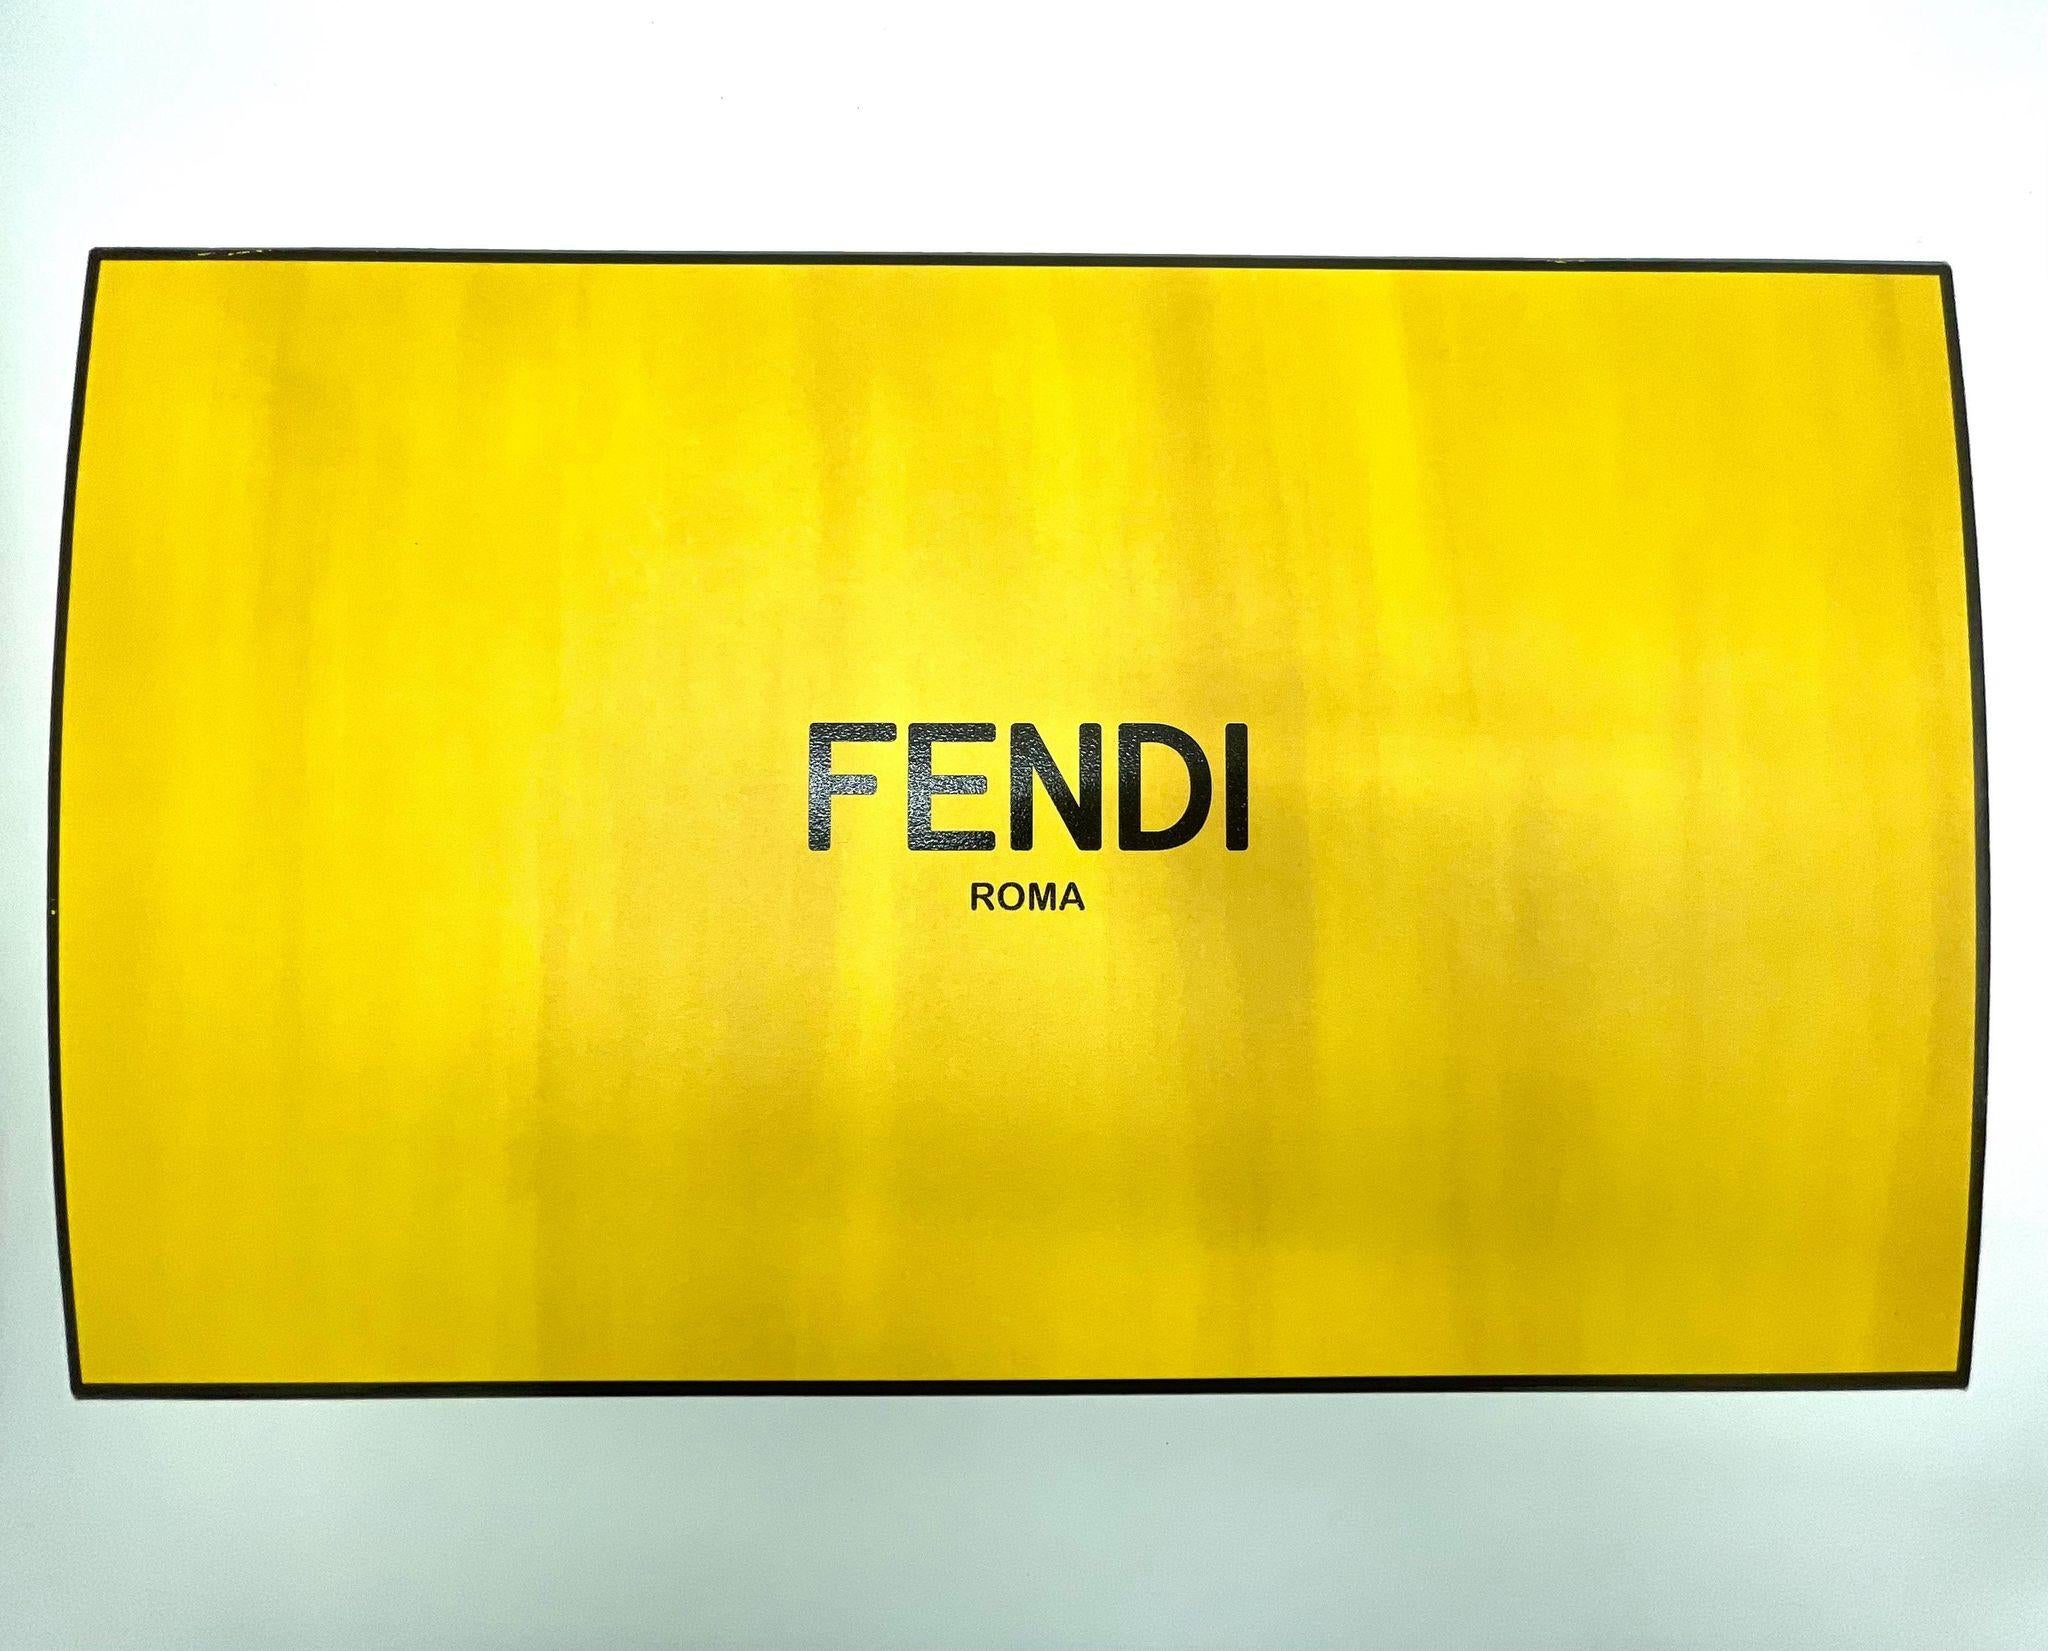 The Fendi DIY Baguette Bag is exactly what it sounds like – it’s a woven, unfinished Fendi Baguette with everything you need to embroider your own bag. It’s sort of an opportunity to have your own one-of-a-kind designer bag, which is kind of cool,